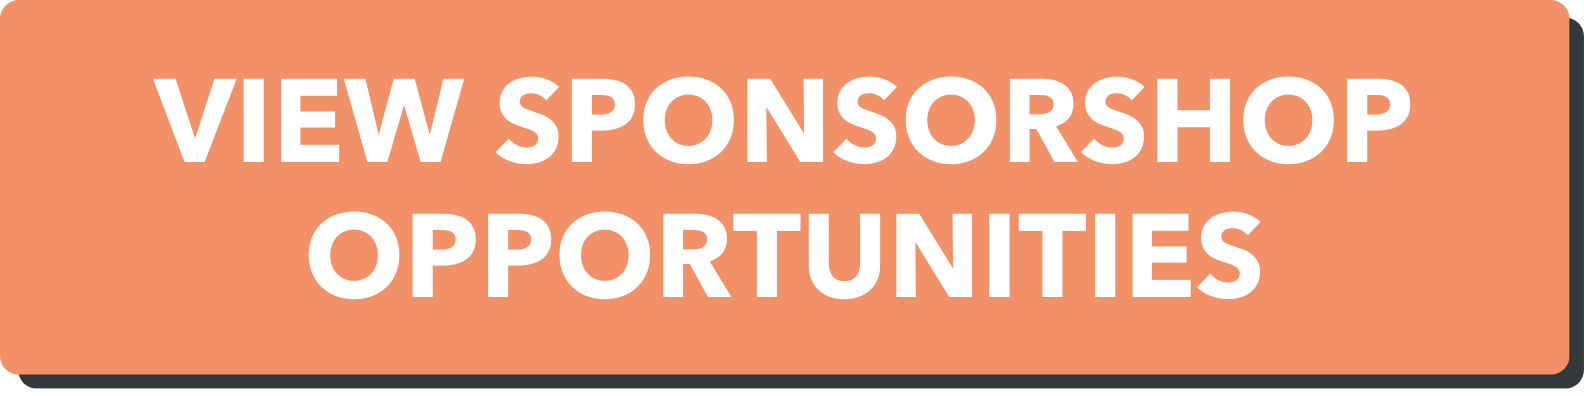 VIEW SPONSORSHIP OPPORTUNITIES